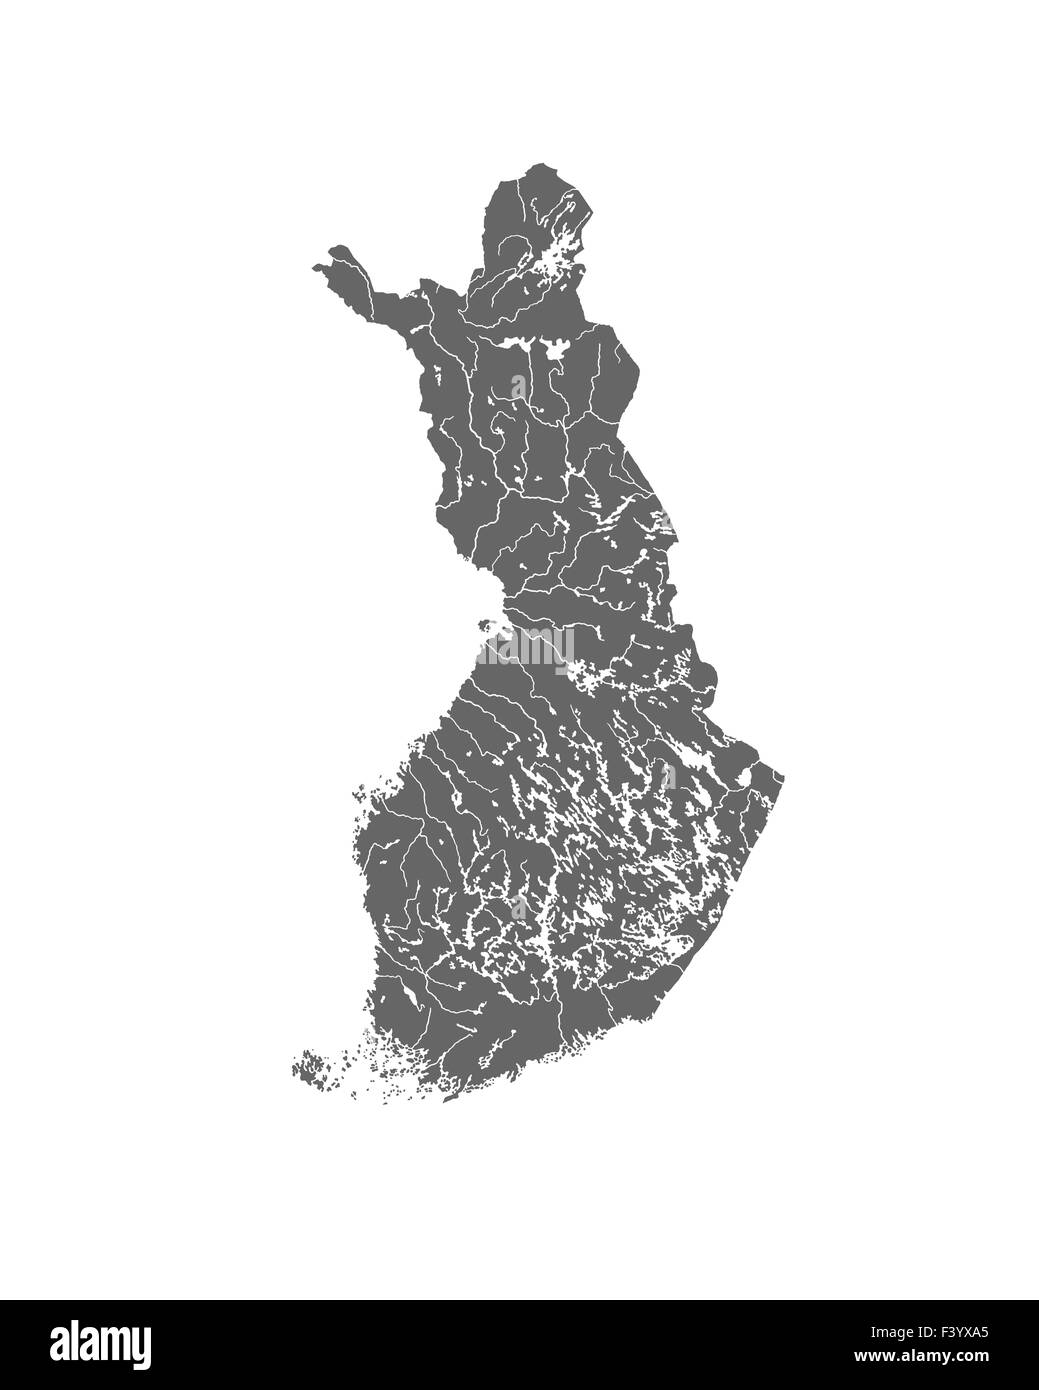 Map of Finland with rivers and lakes. Stock Photo